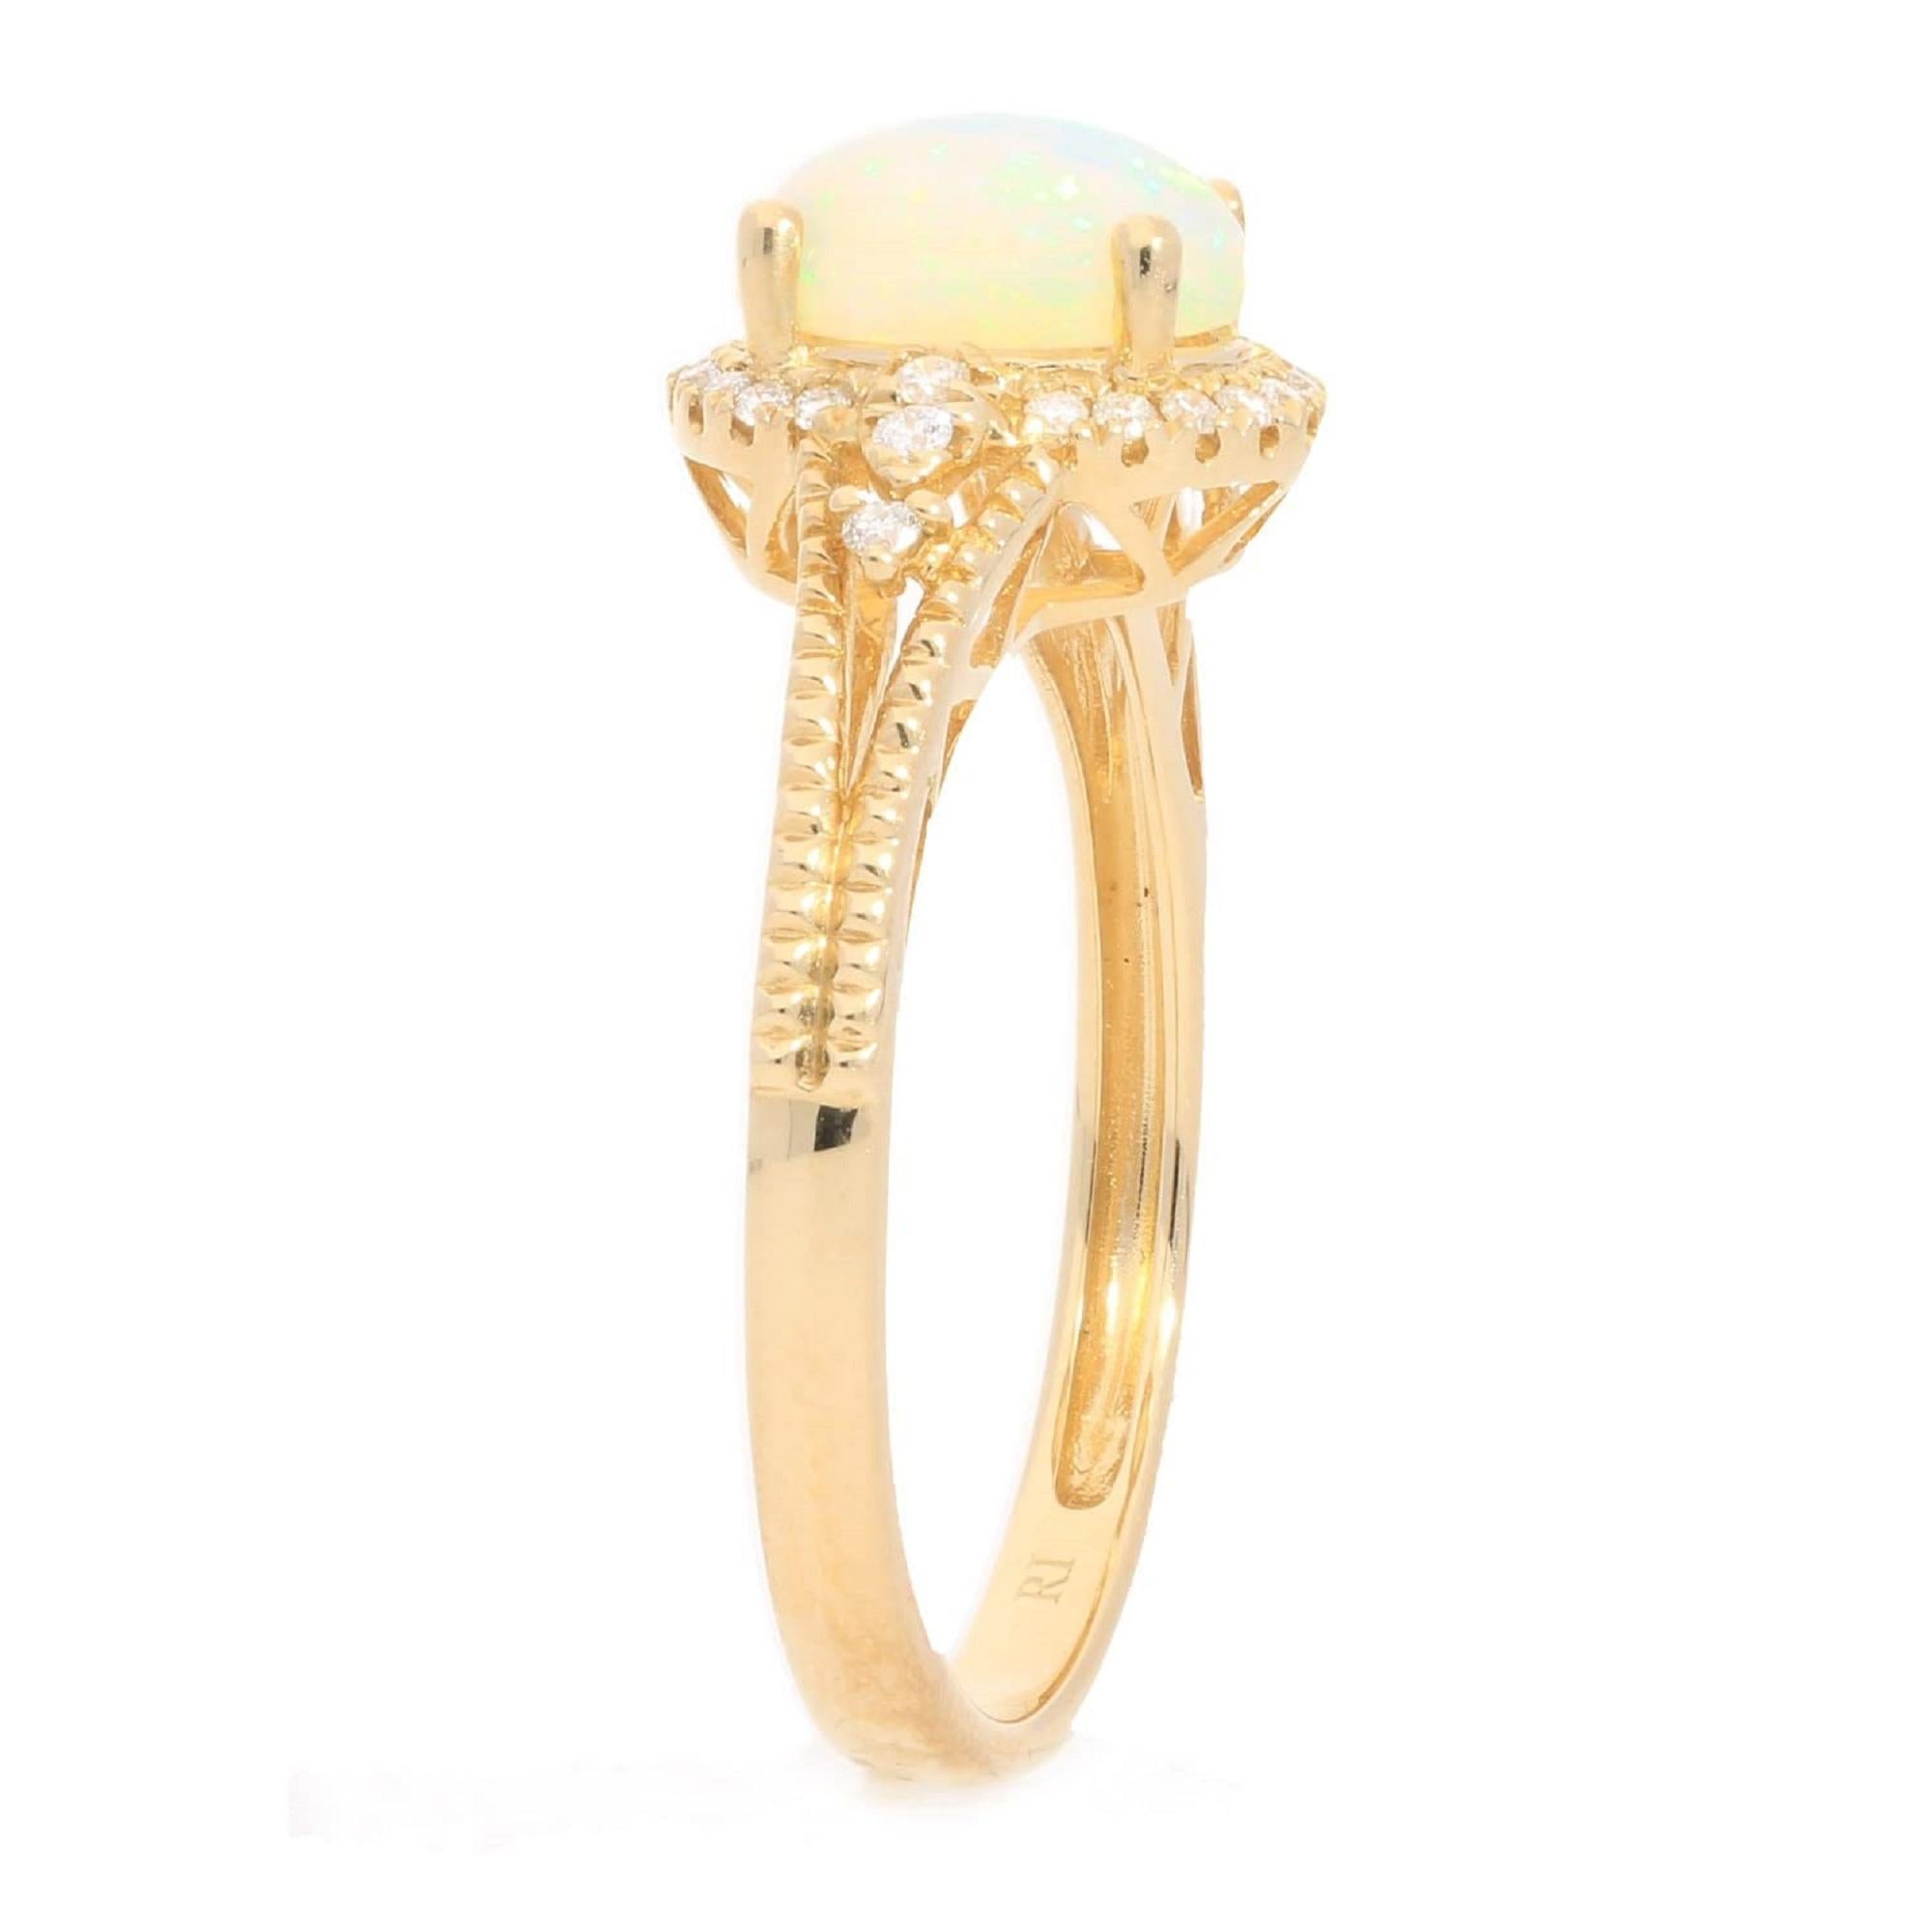 Decorate yourself in elegance with this Ring is crafted from 10-karat Yellow Gold by Gin & Grace Ring. This Ring is made up of 8x6 mm Oval-cab Ethiopian Opal (1Pcs) 0.80 Carat and Round-cut White Diamond (26 Pcs) 0.12 Carat. This Ring is weight 2.49